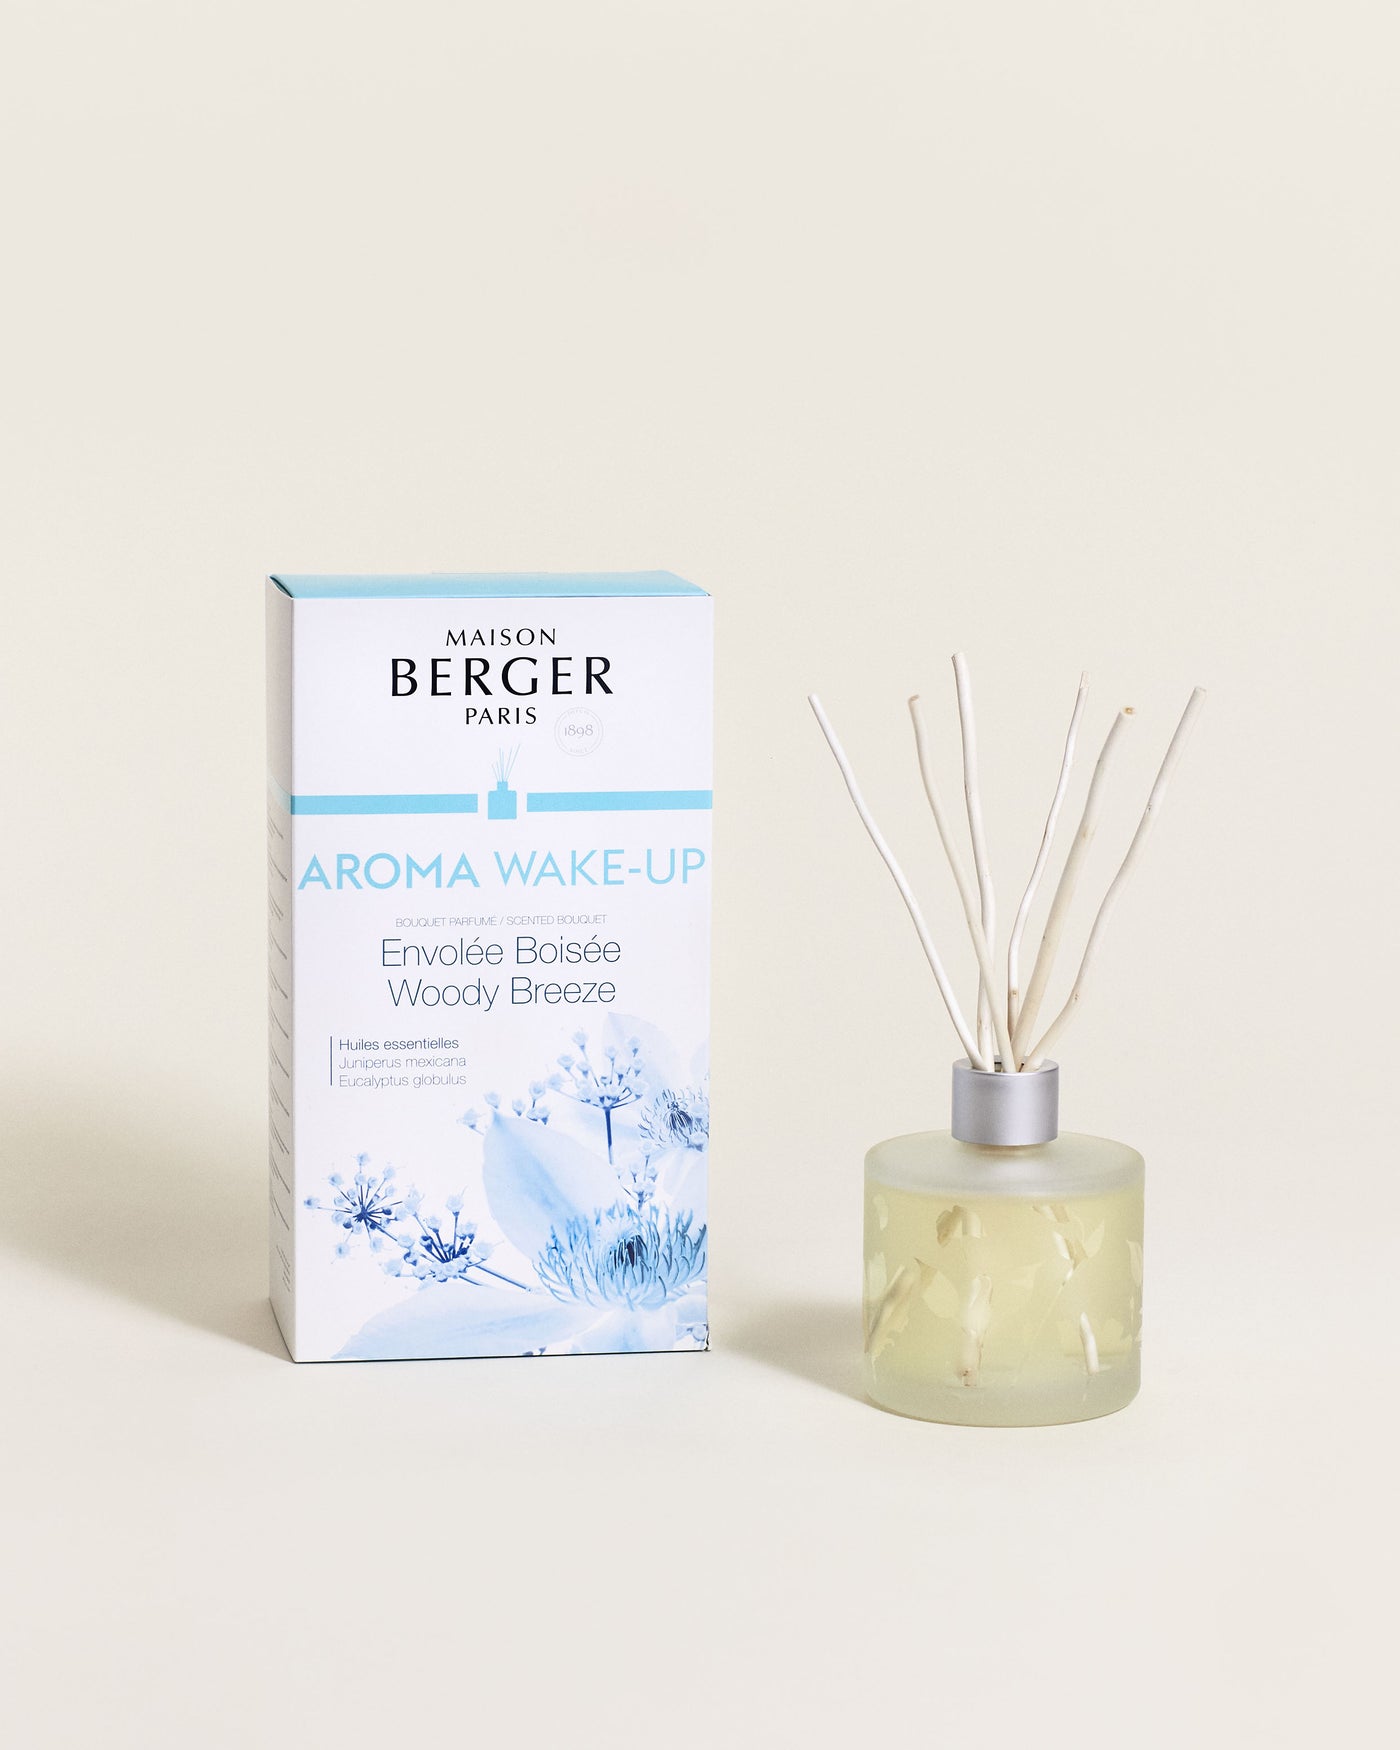 Aroma Wake-Up Scented Bouquet